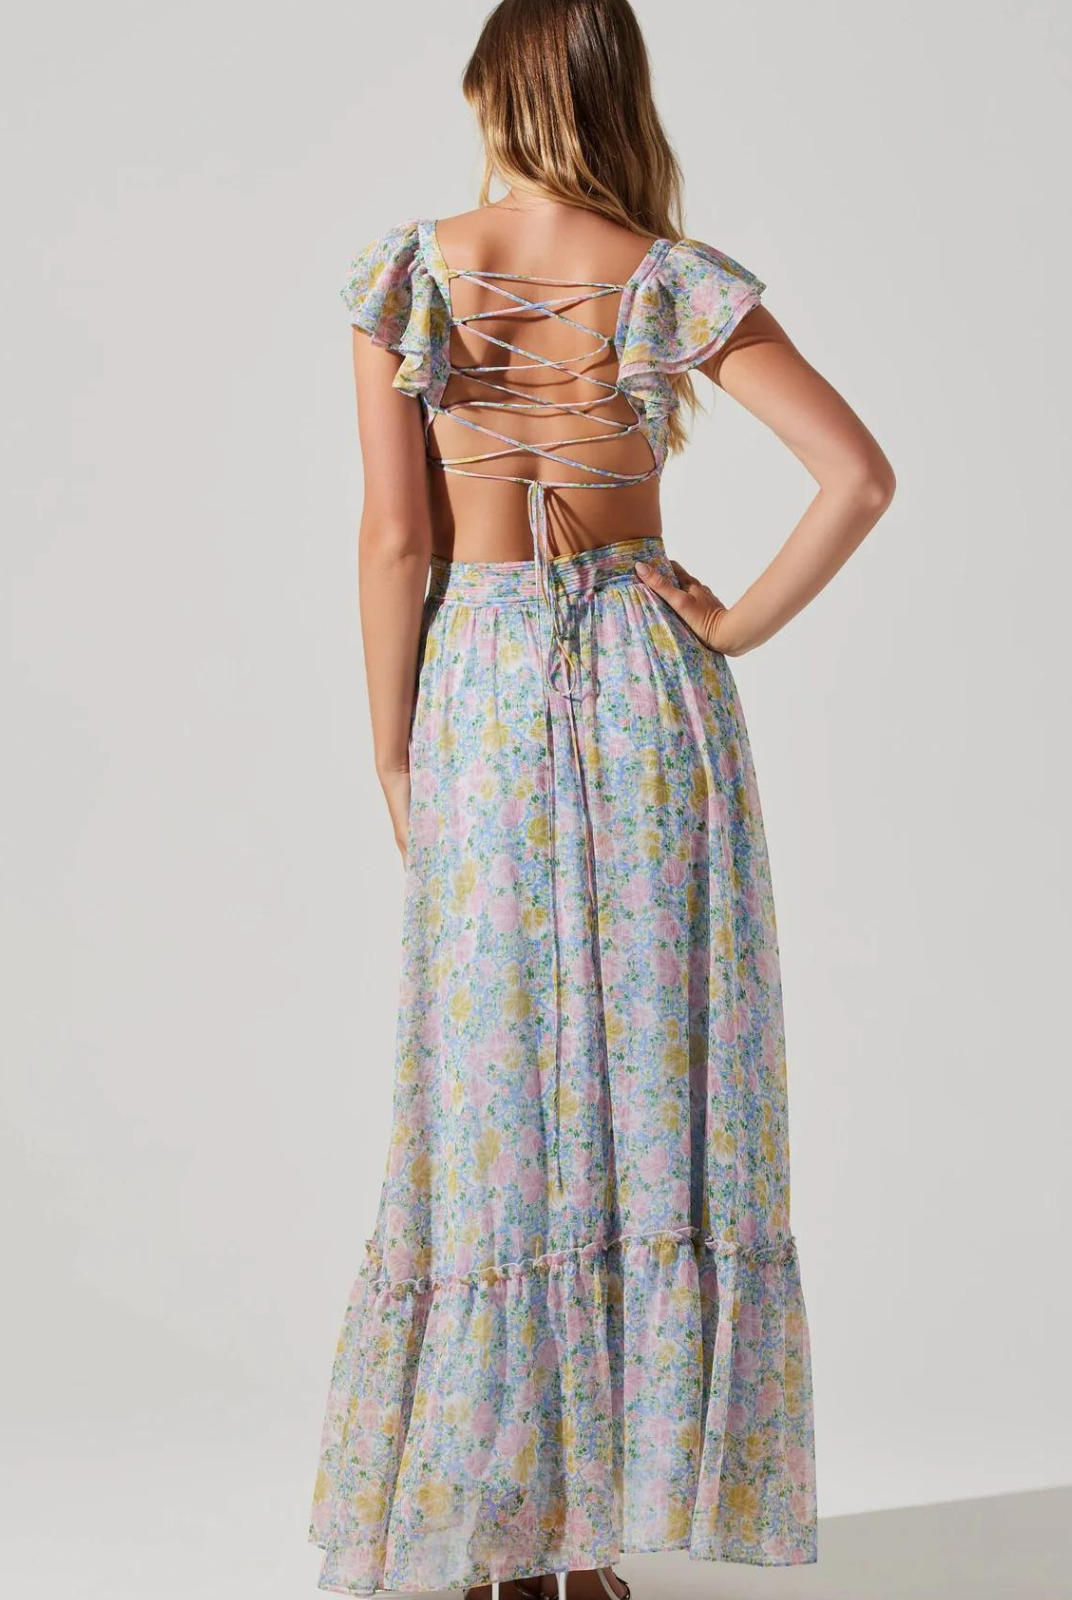 ASTR The Label Primrose Floral Maxi Dress.  Sweetheart neckline Pleated bodice Cutout accents Strappy back design Short, ruffle sleeves Concealed back zip closure